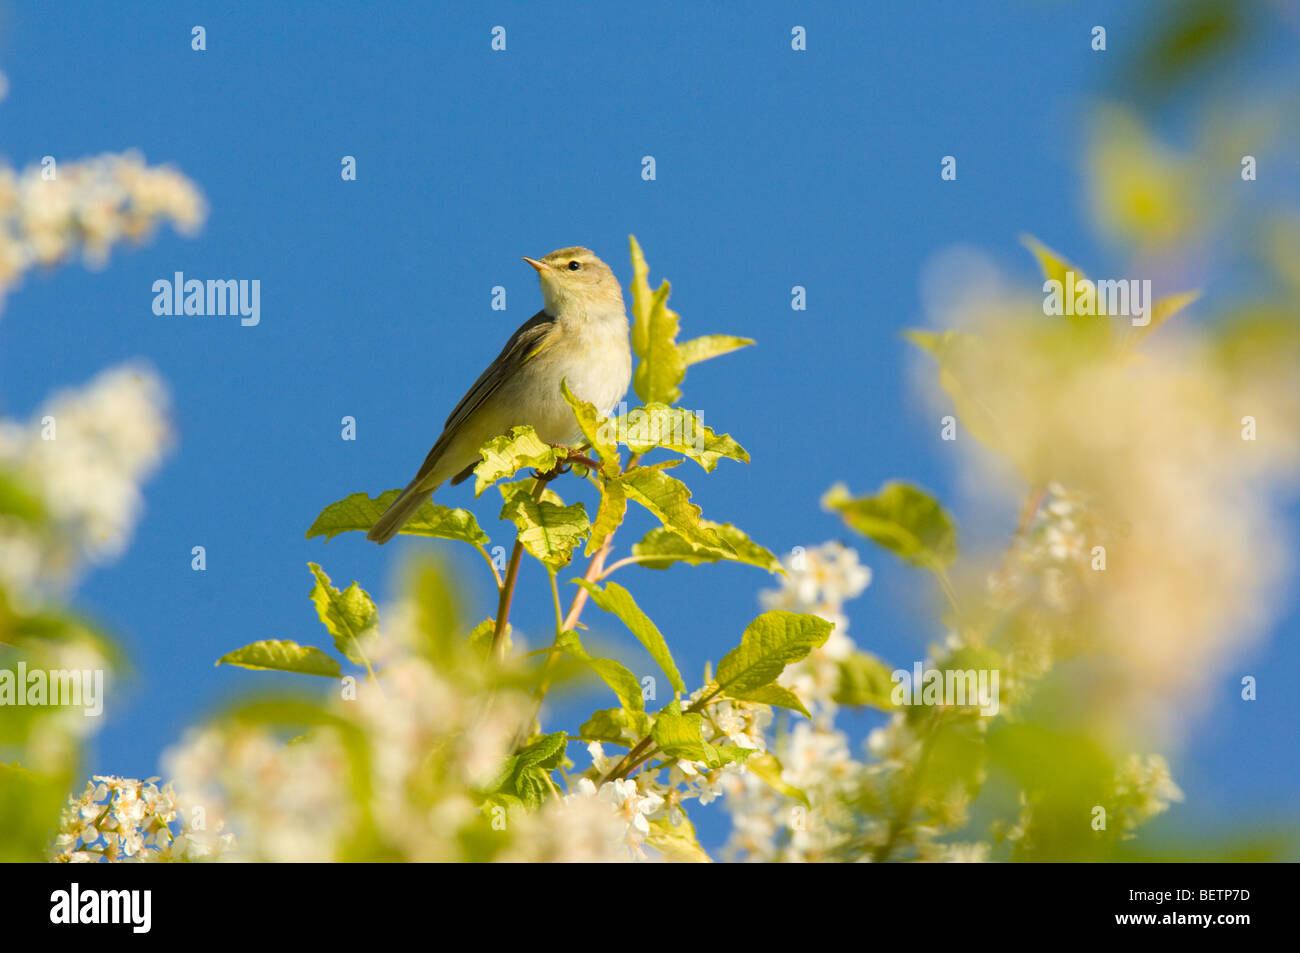 Willow Warbler, Phylloscopus trochilus, perched on a Bird Cherry tree (Prunus padus) in blossom, Scottish Highlands. Stock Photo